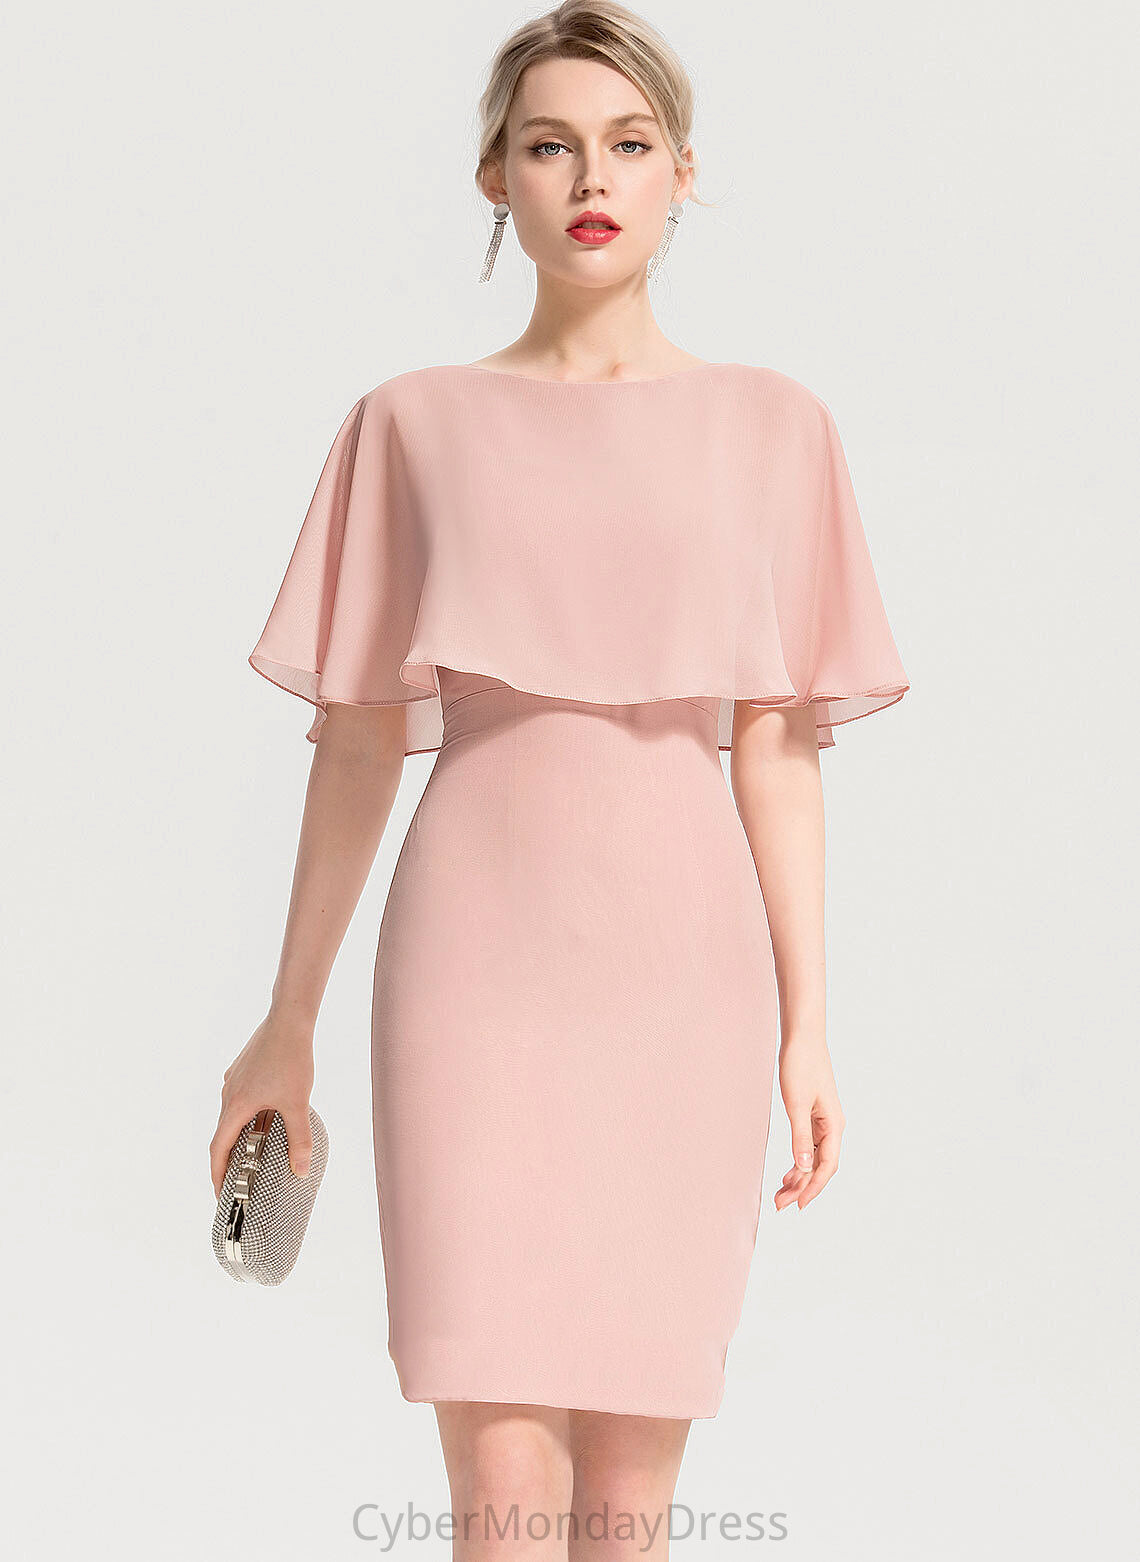 Chiffon Sheath/Column Dress Catalina Scoop Ruffles With Knee-Length Cocktail Neck Cascading Cocktail Dresses